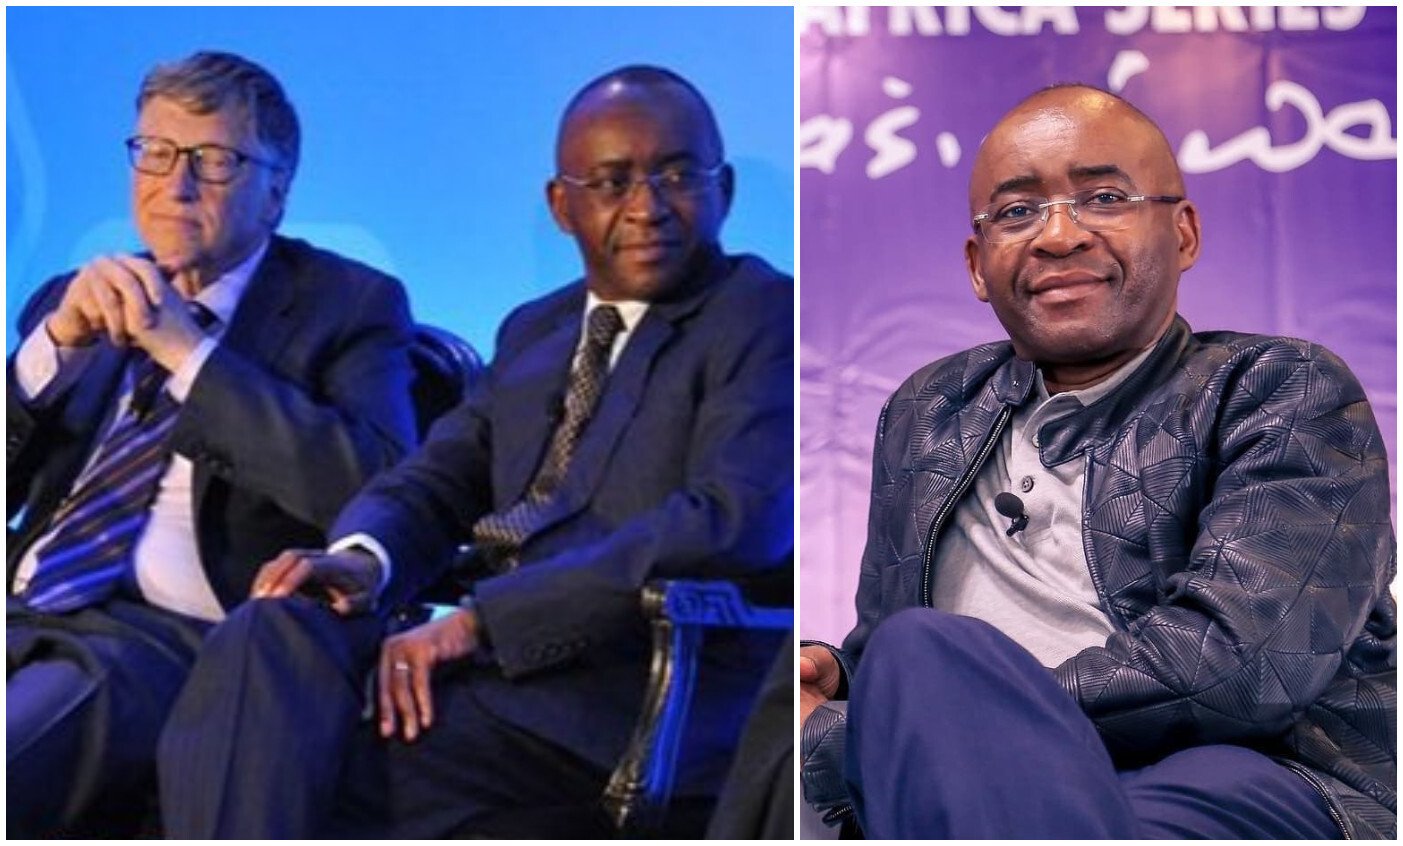 Learn more about Strive Masiyiwa, Zimbabwe’s richest businessman who’s been dubbed the “Bill Gates of Africa”. Photos: @NewsHawksLive/Twitter, @famous_magzim/Instagram